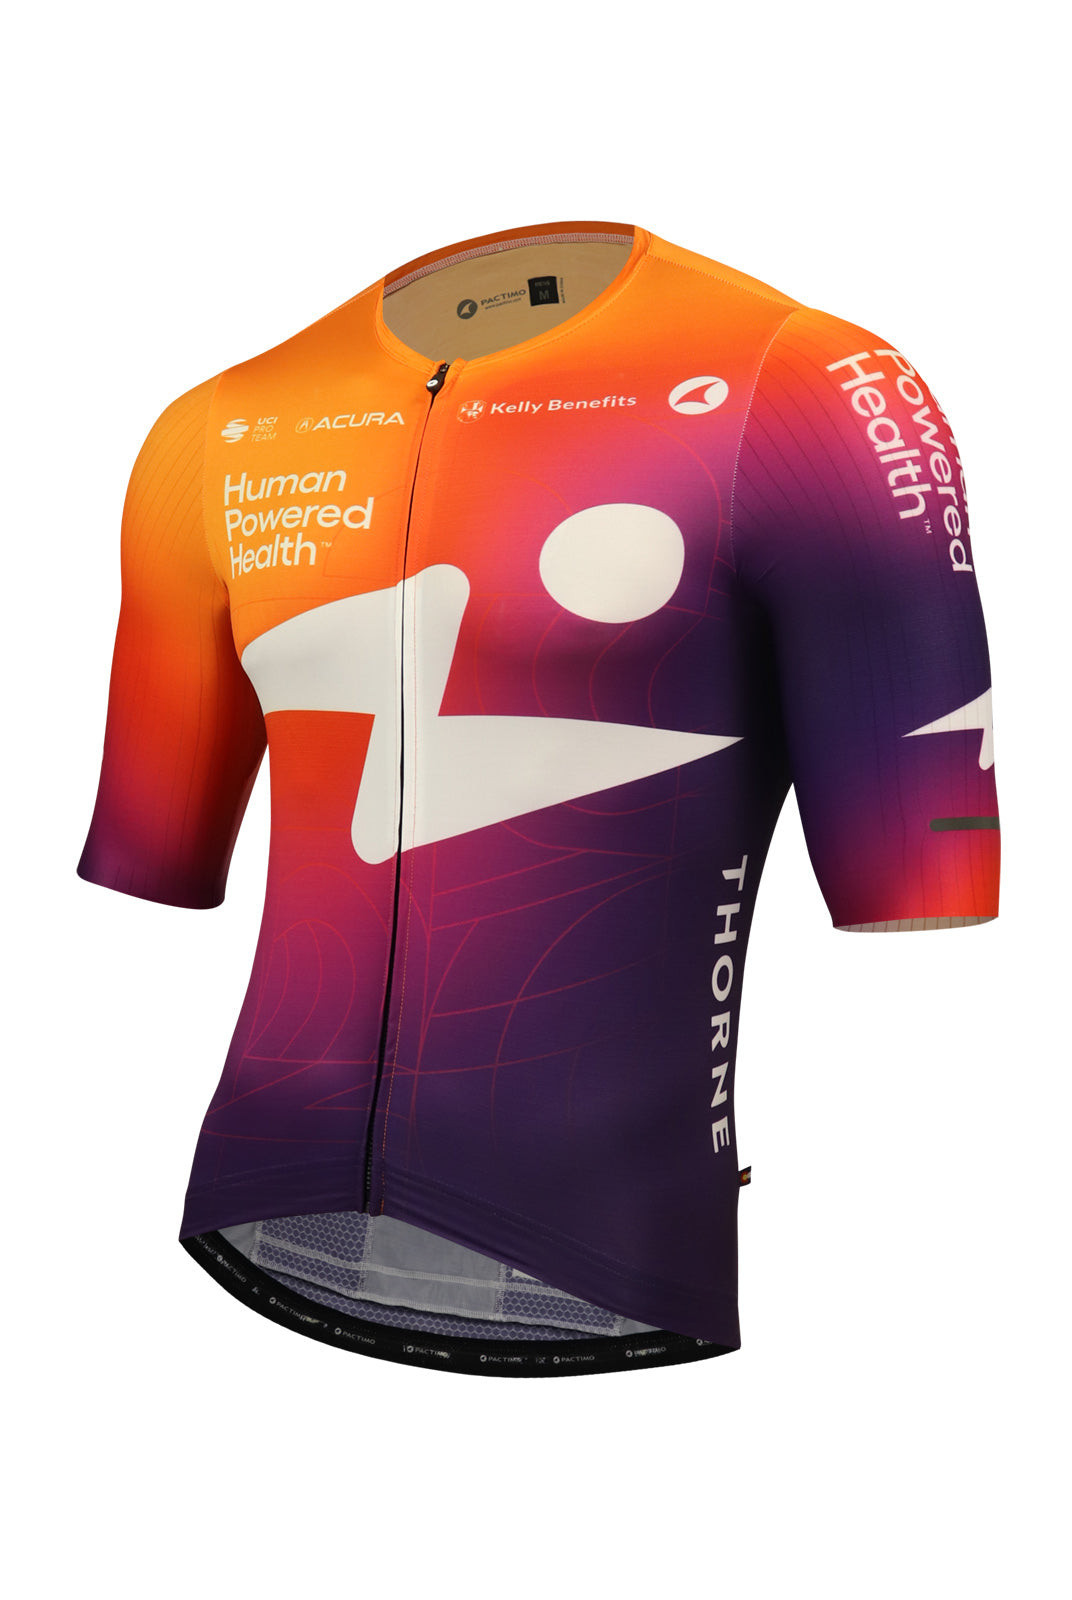 Human Powered Health Aero Cycling Jersey - Flyte Front View